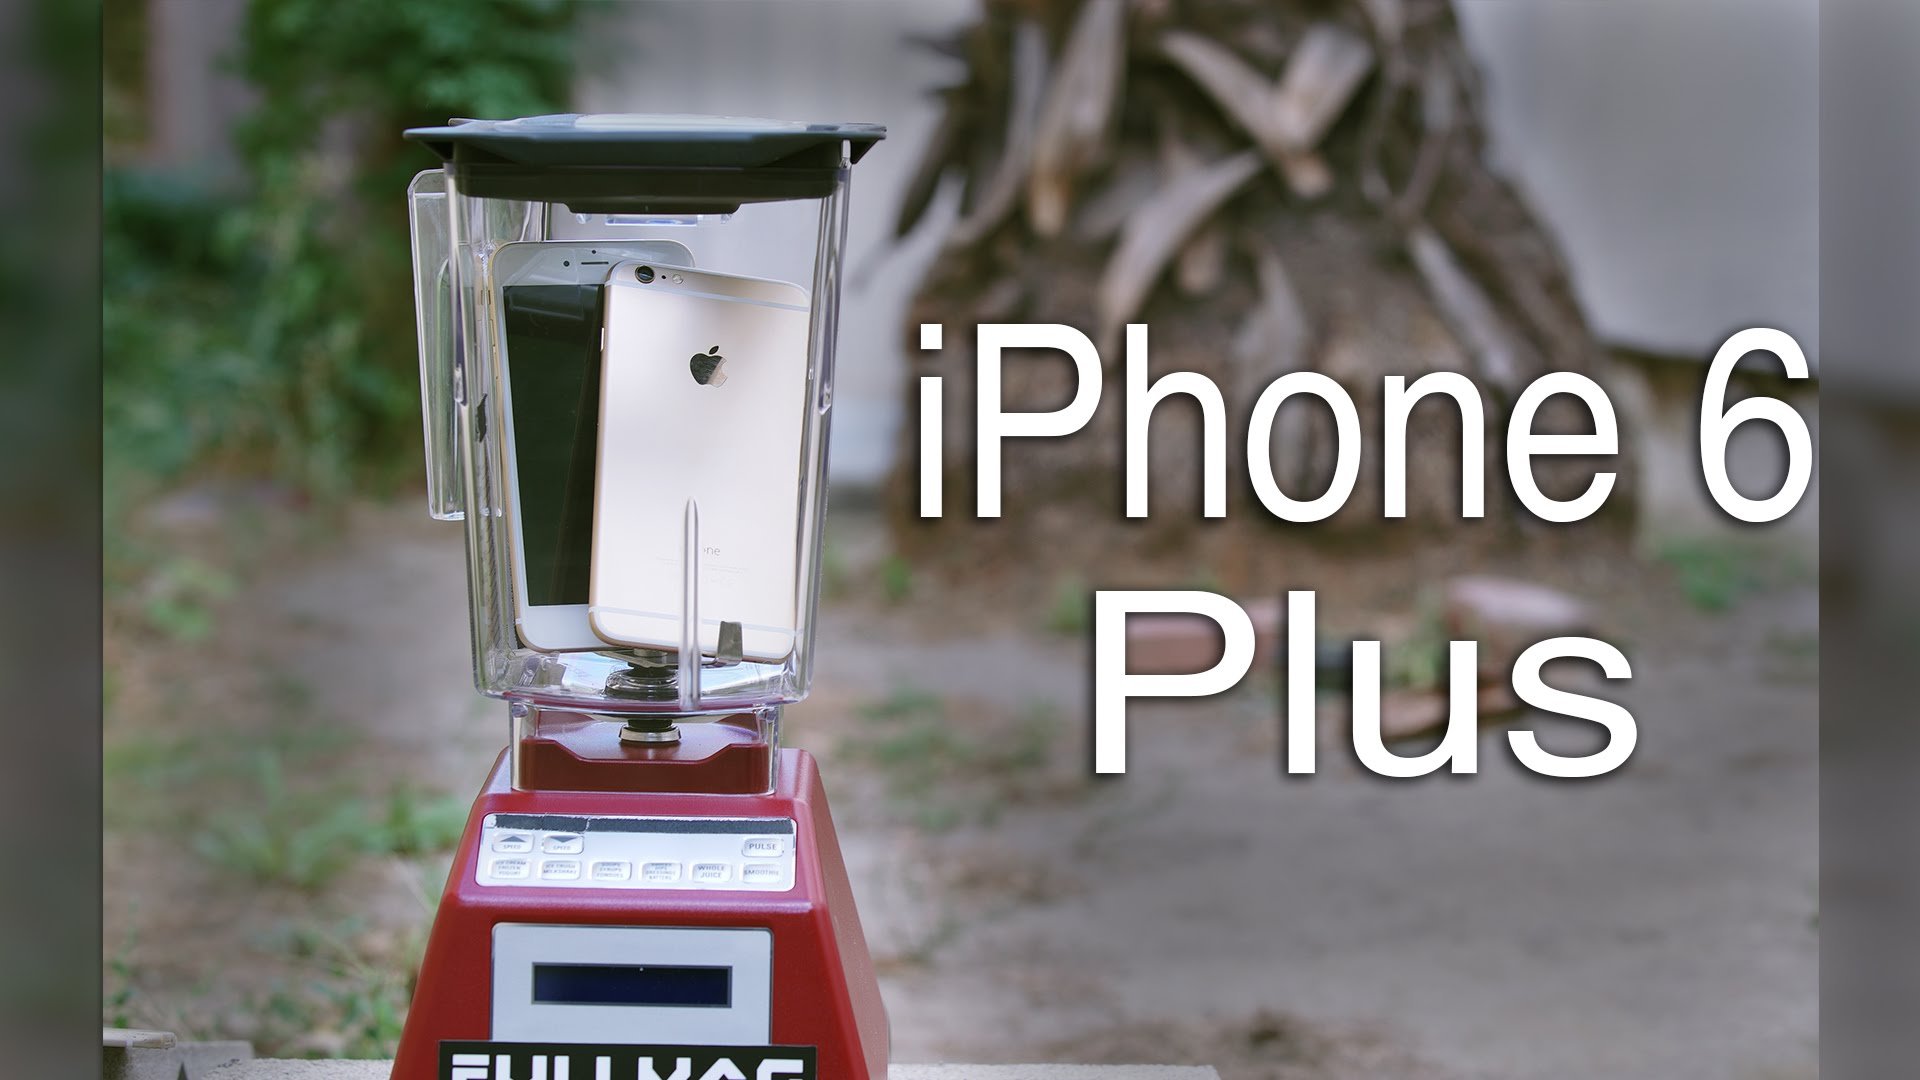 iPhone 6 Plus: Will it Blend? (Video) 4